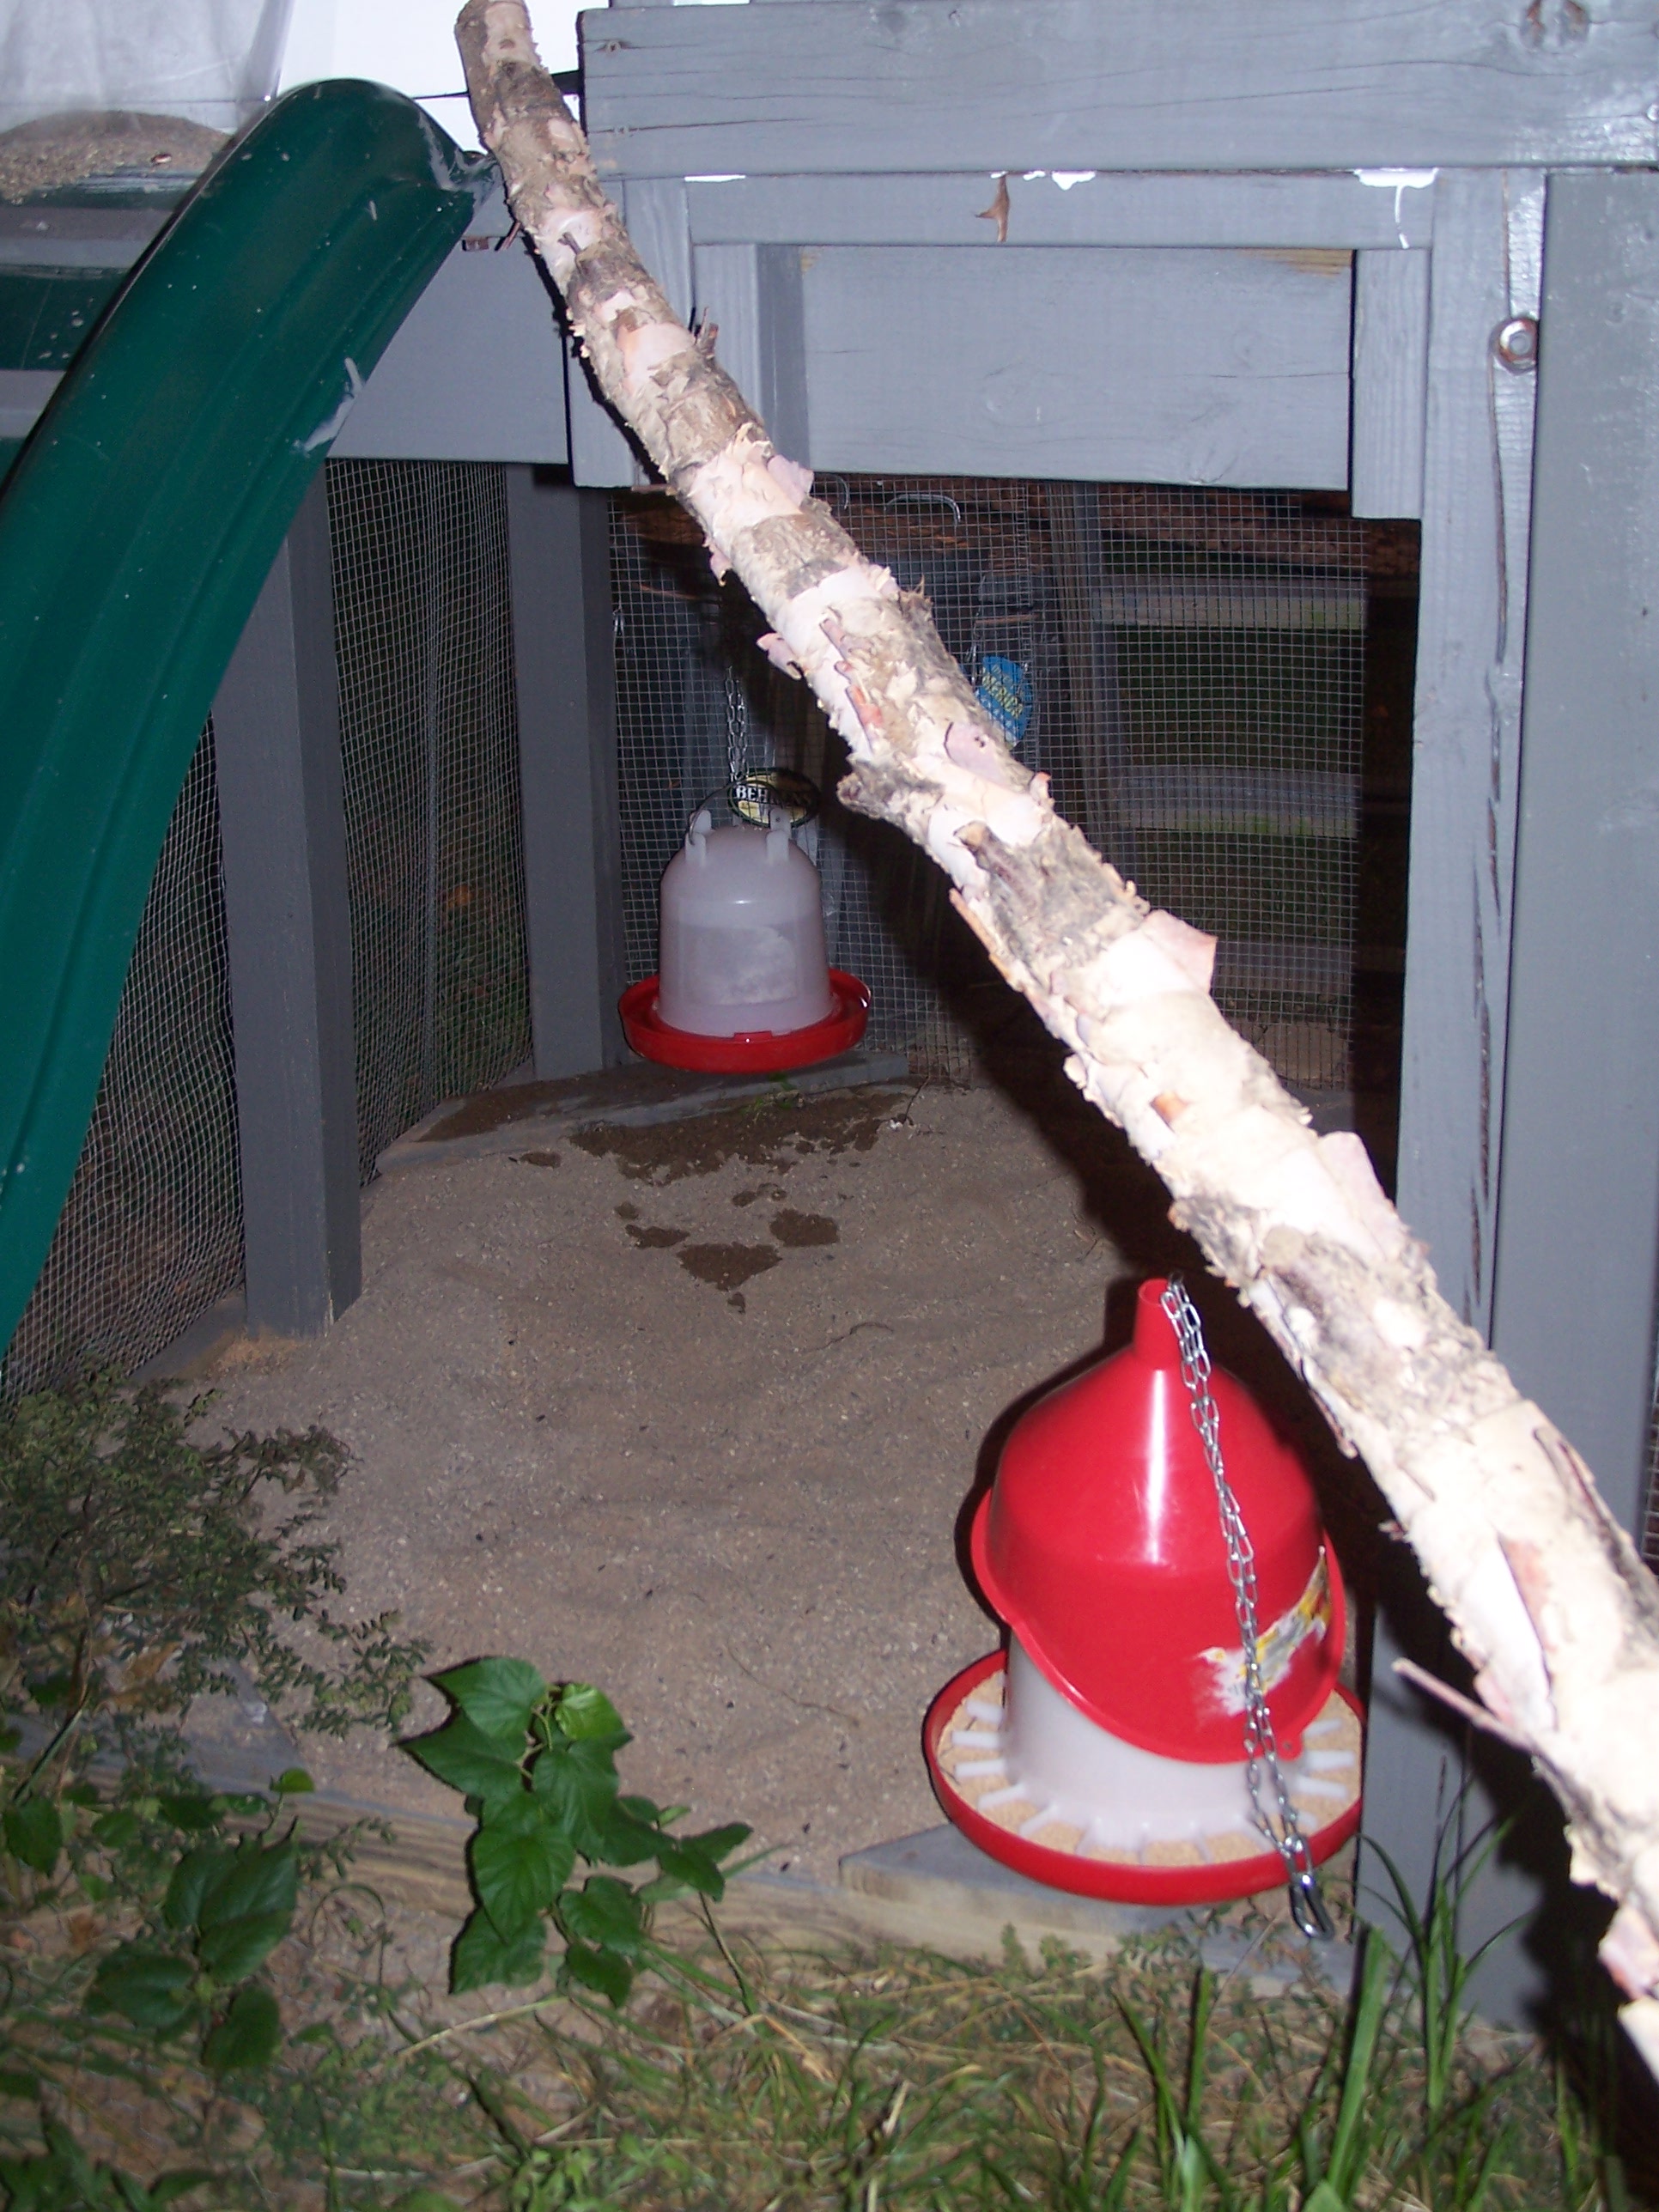 Shot of the "sandbox" area under the coop.  I hang the water fount and feeder from eye hooks to keep everything clean.